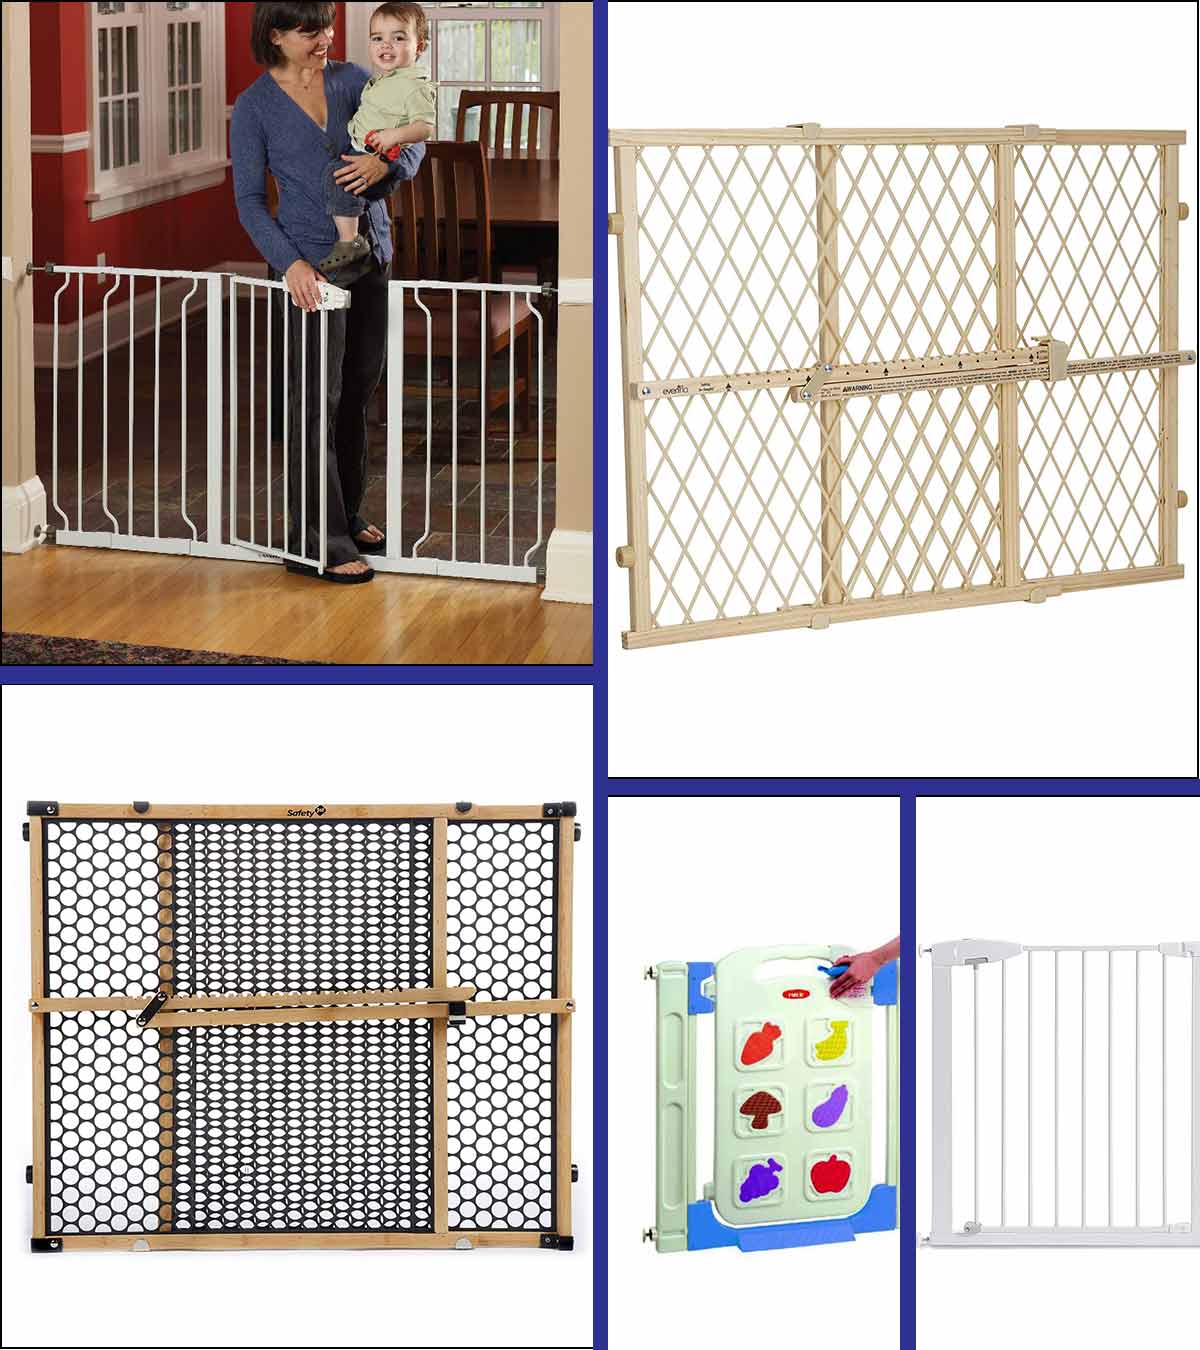 self closing child safety gates for stairs